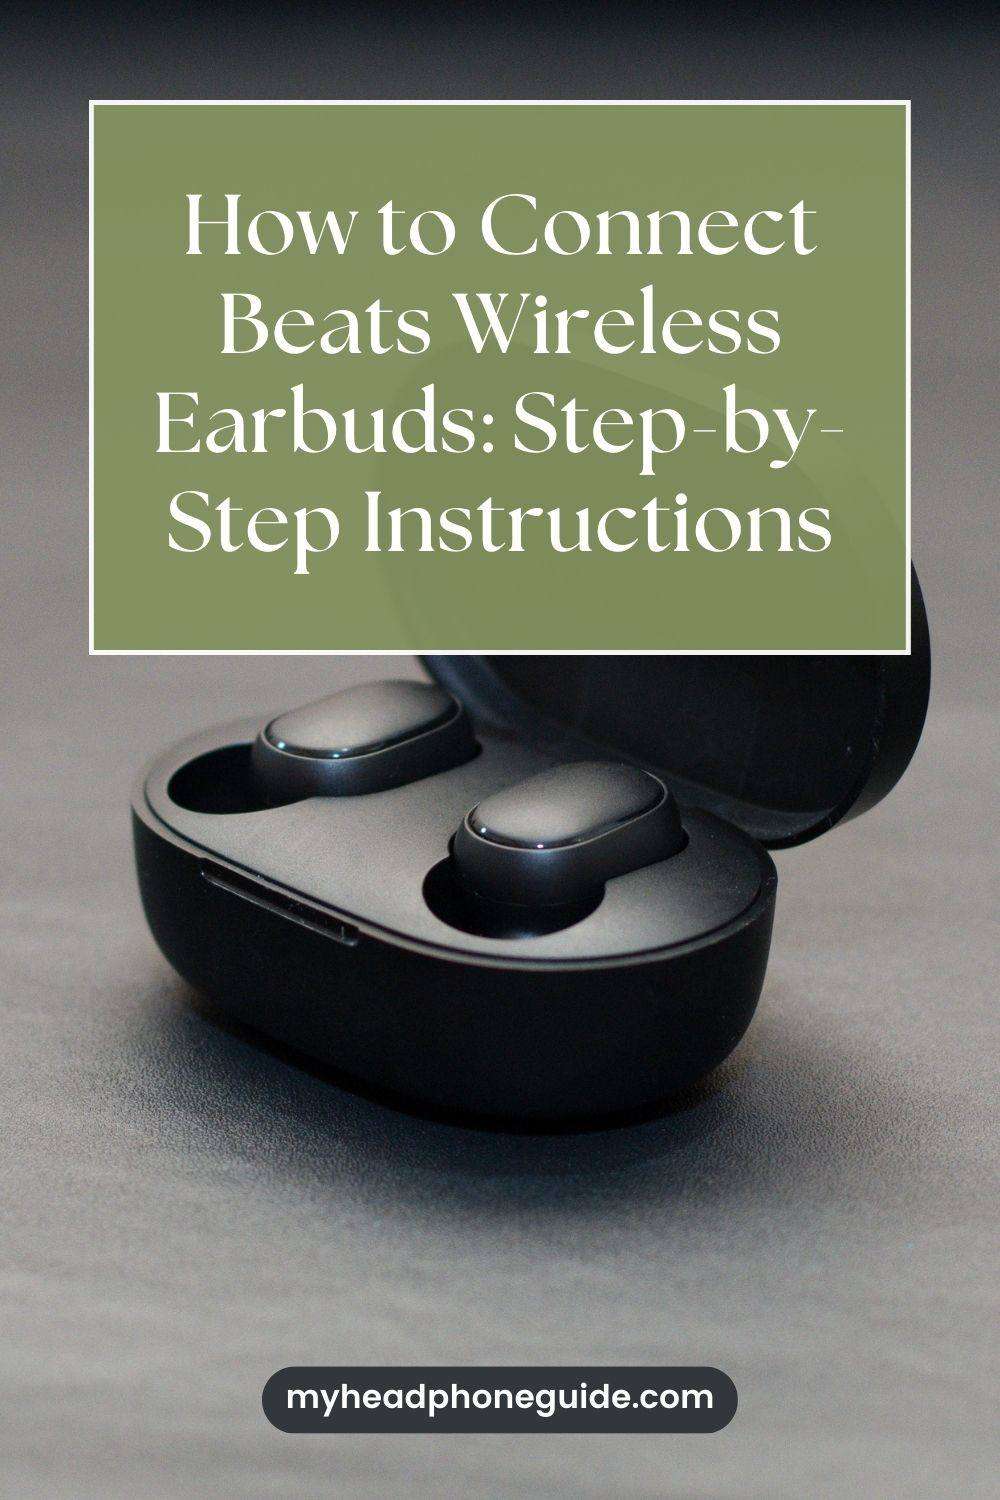 How to Connect Beats Wireless Earbuds